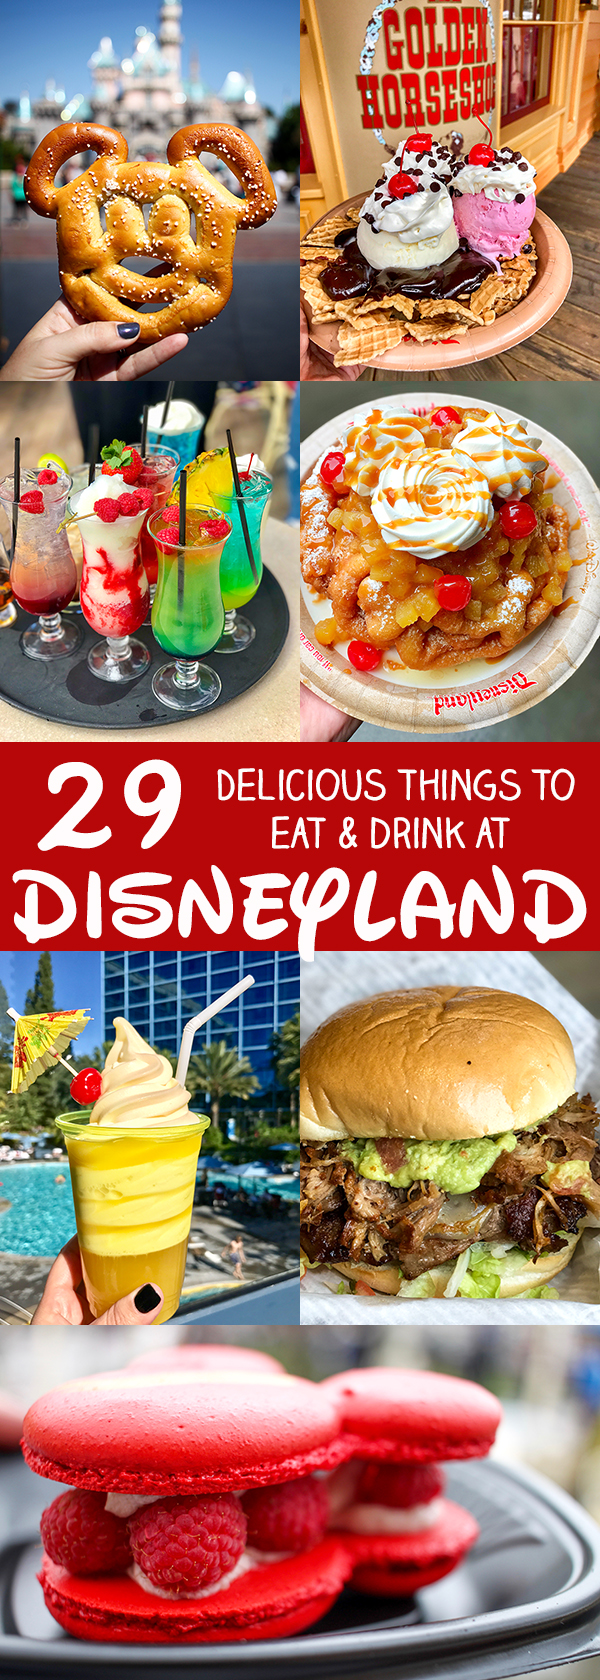 29 More Delicious Things to Eat and Drink at Disneyland - What to Eat at Disneyland Tips and Tricks